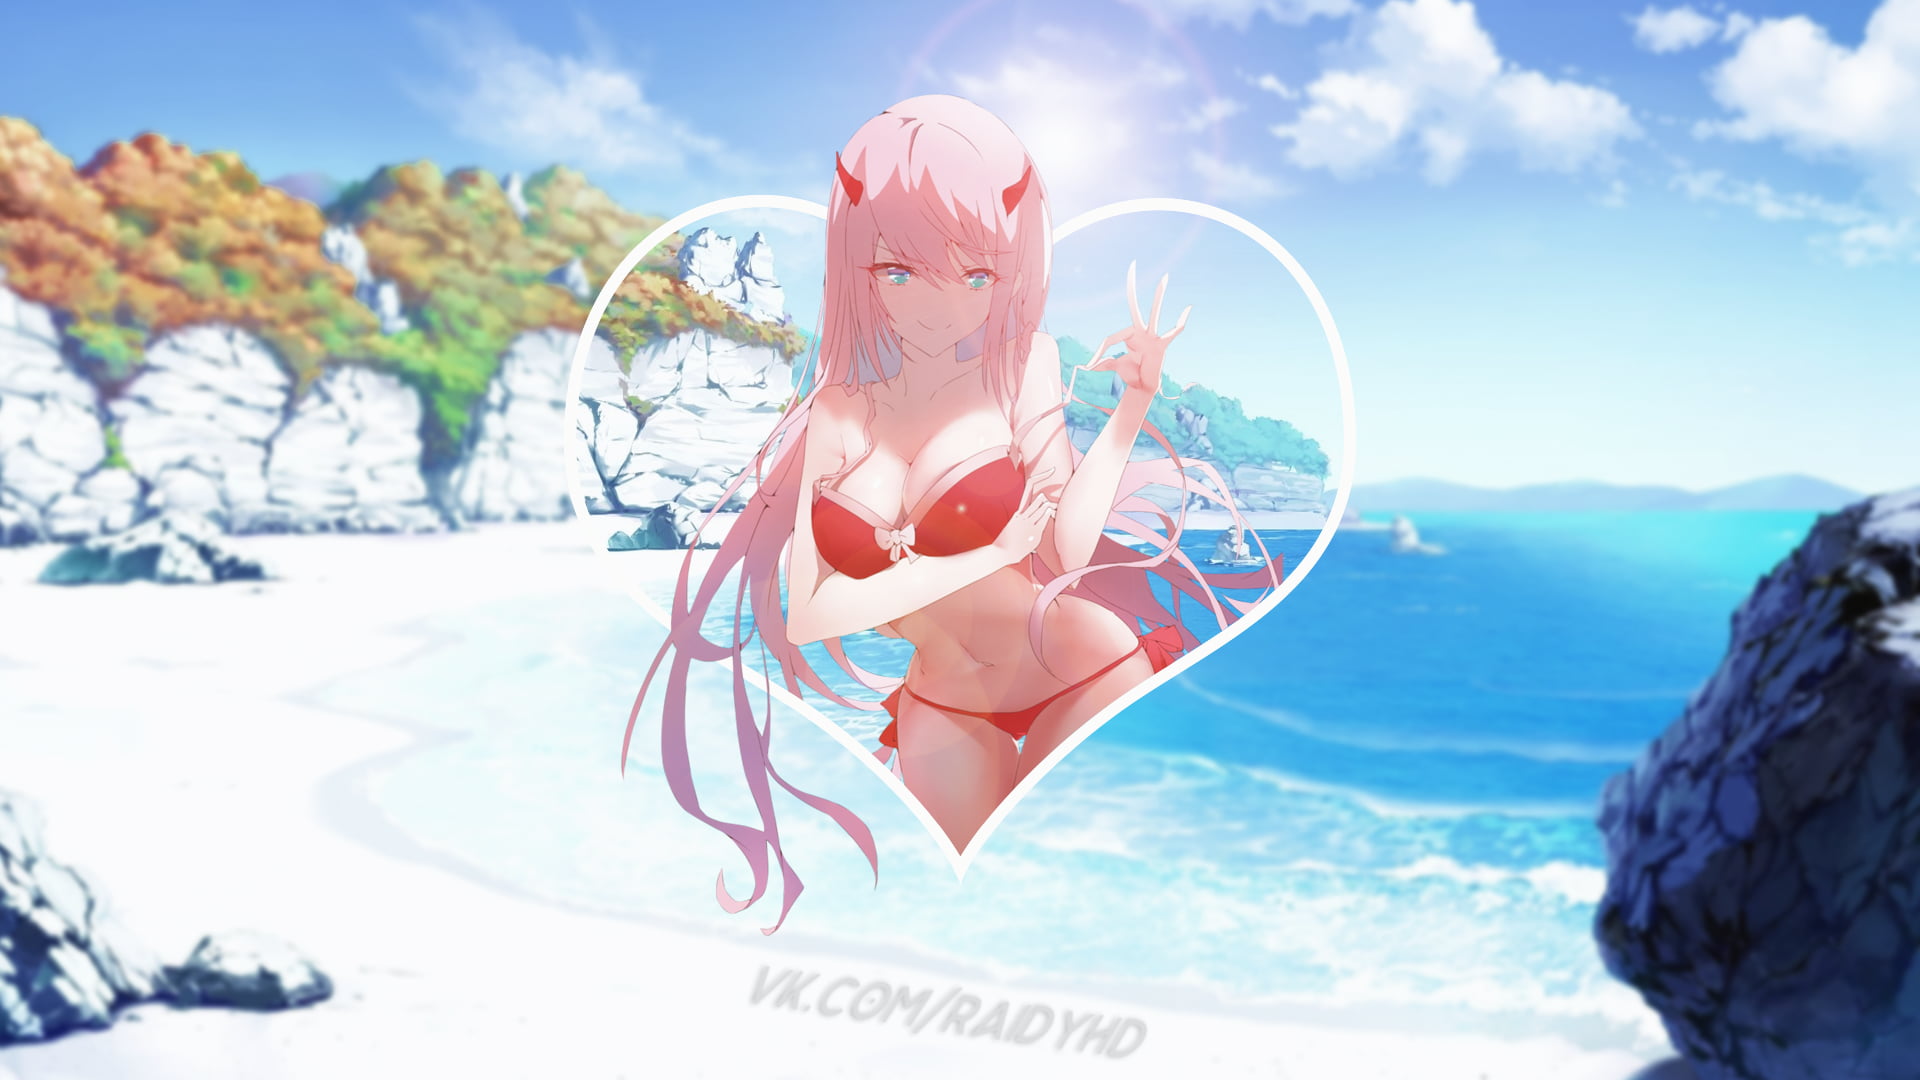 Female Anime Character Wearing Red Bikini Illustration Anime Anime Girls Picture In Picture Zero Two Darling In The Franxx Hd Wallpaper Wallpaper Flare